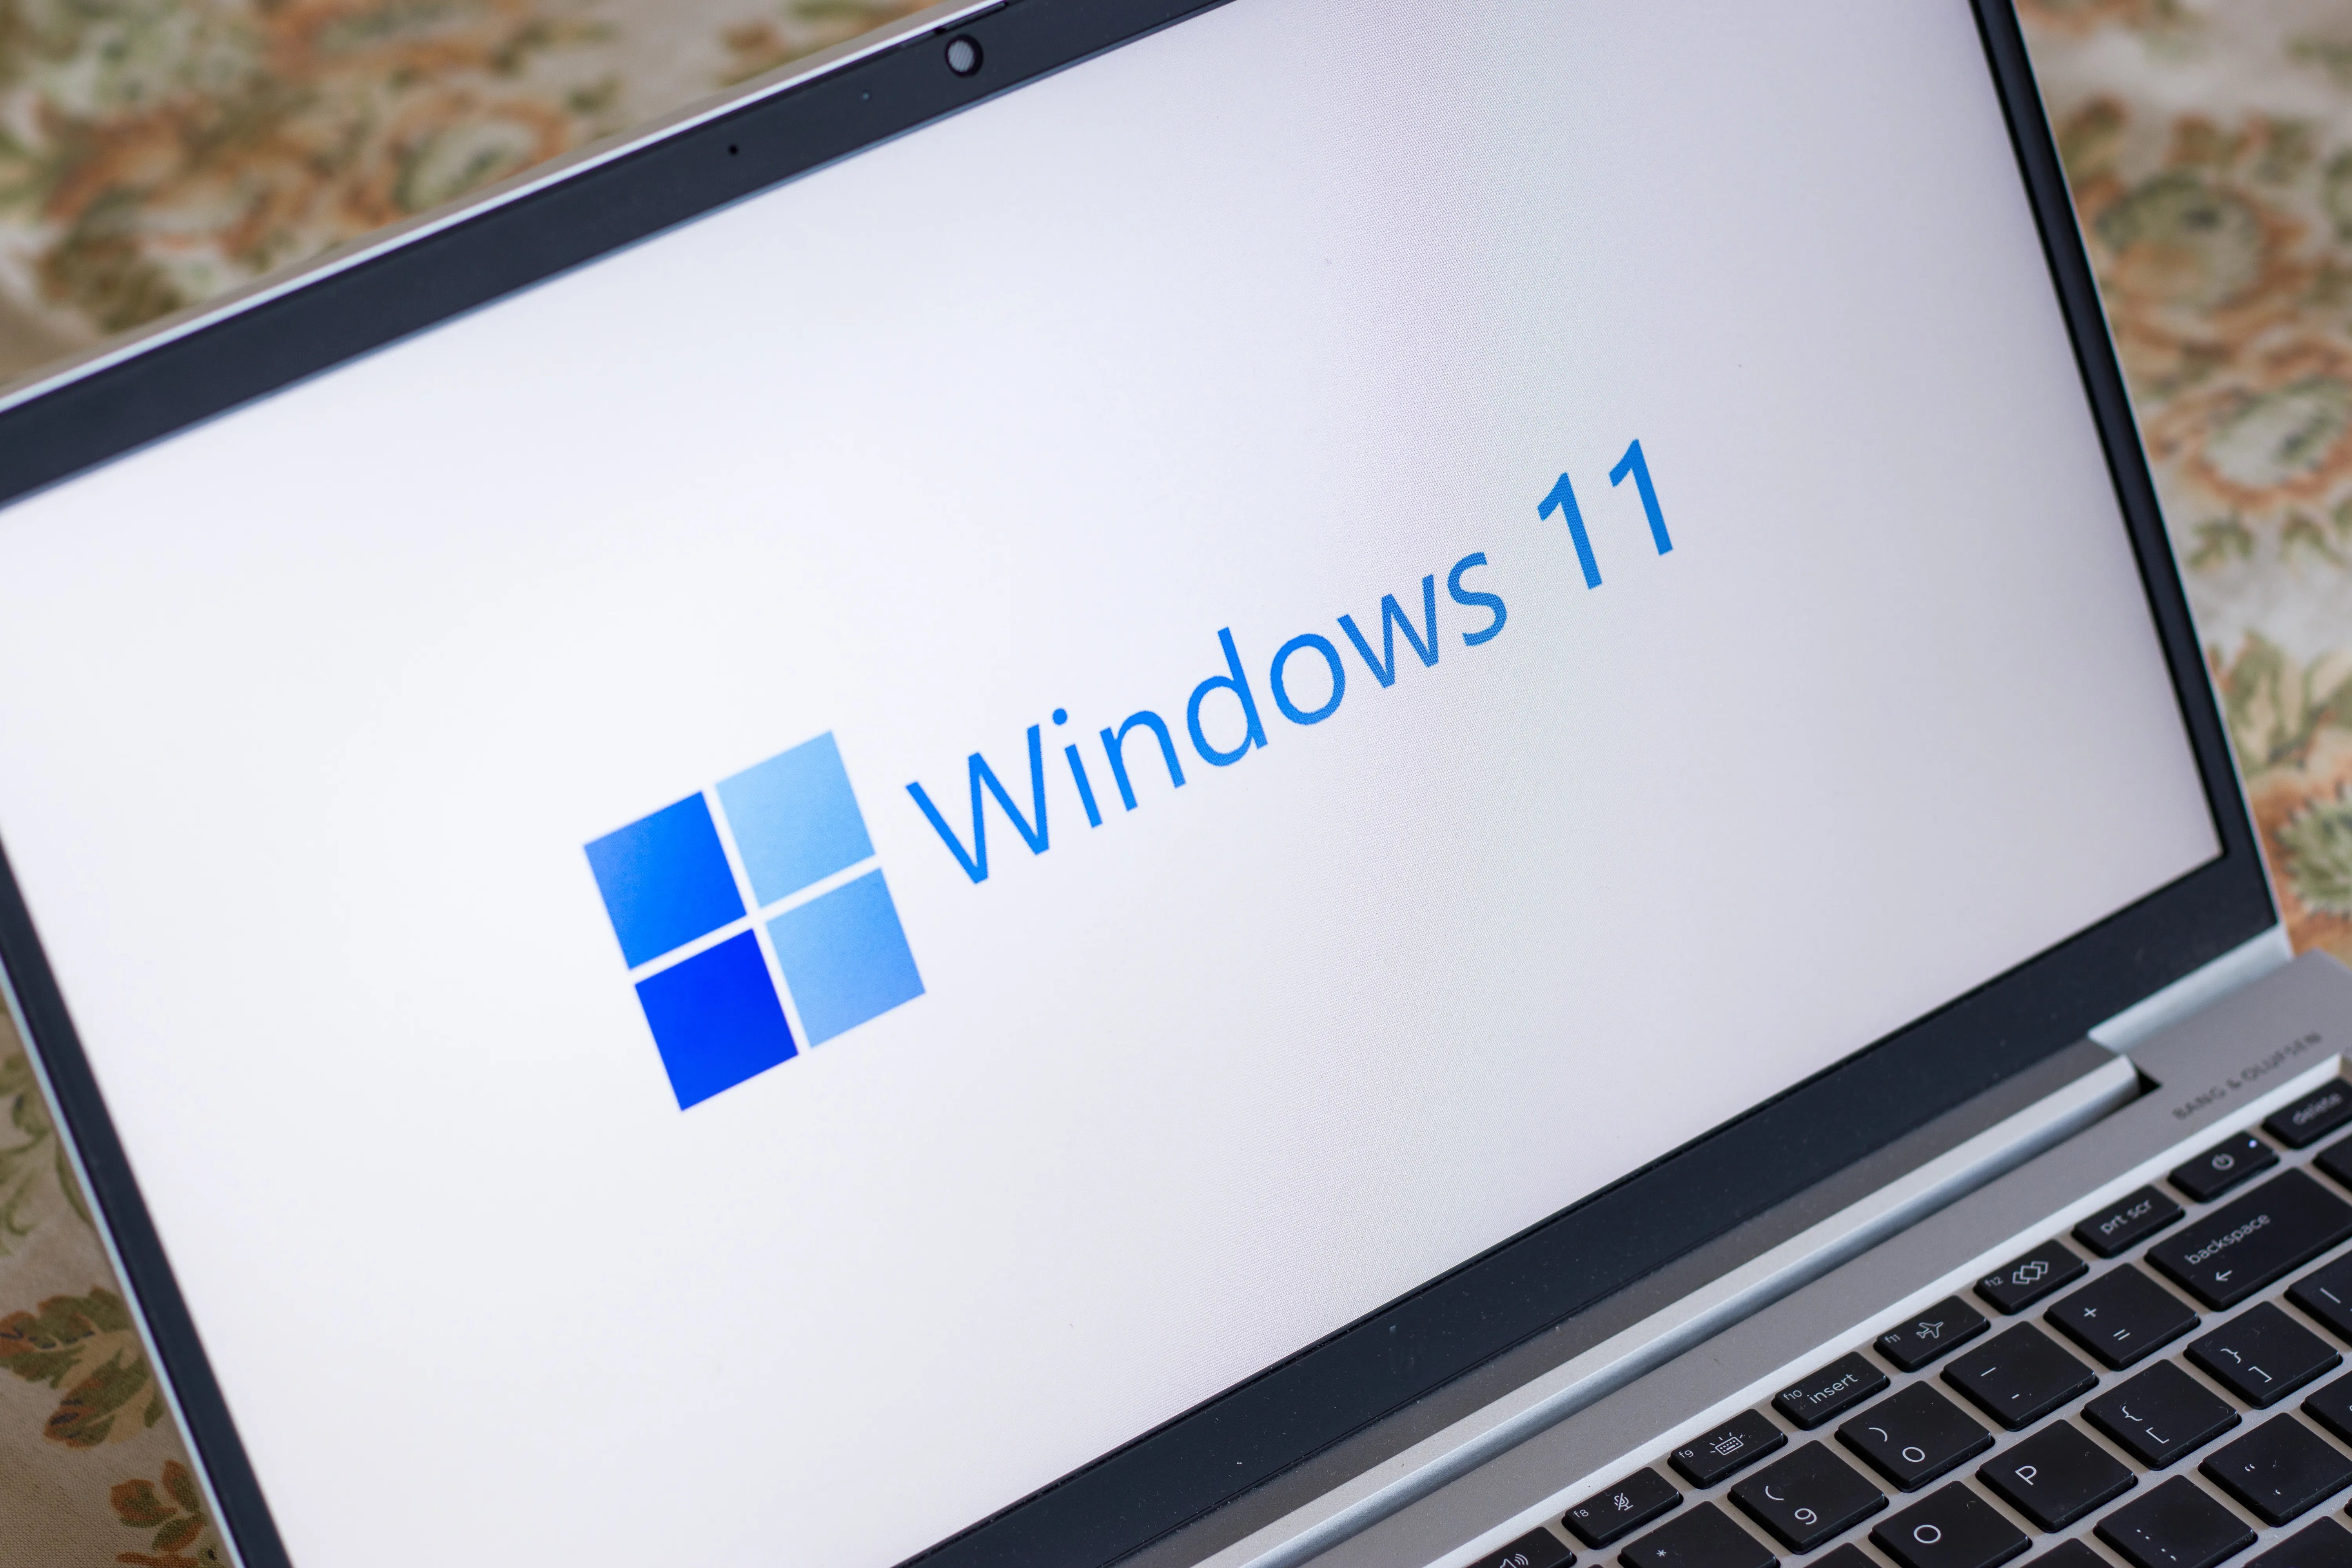 Windows 11 Update: Features, Compatibility and How to Get it Free